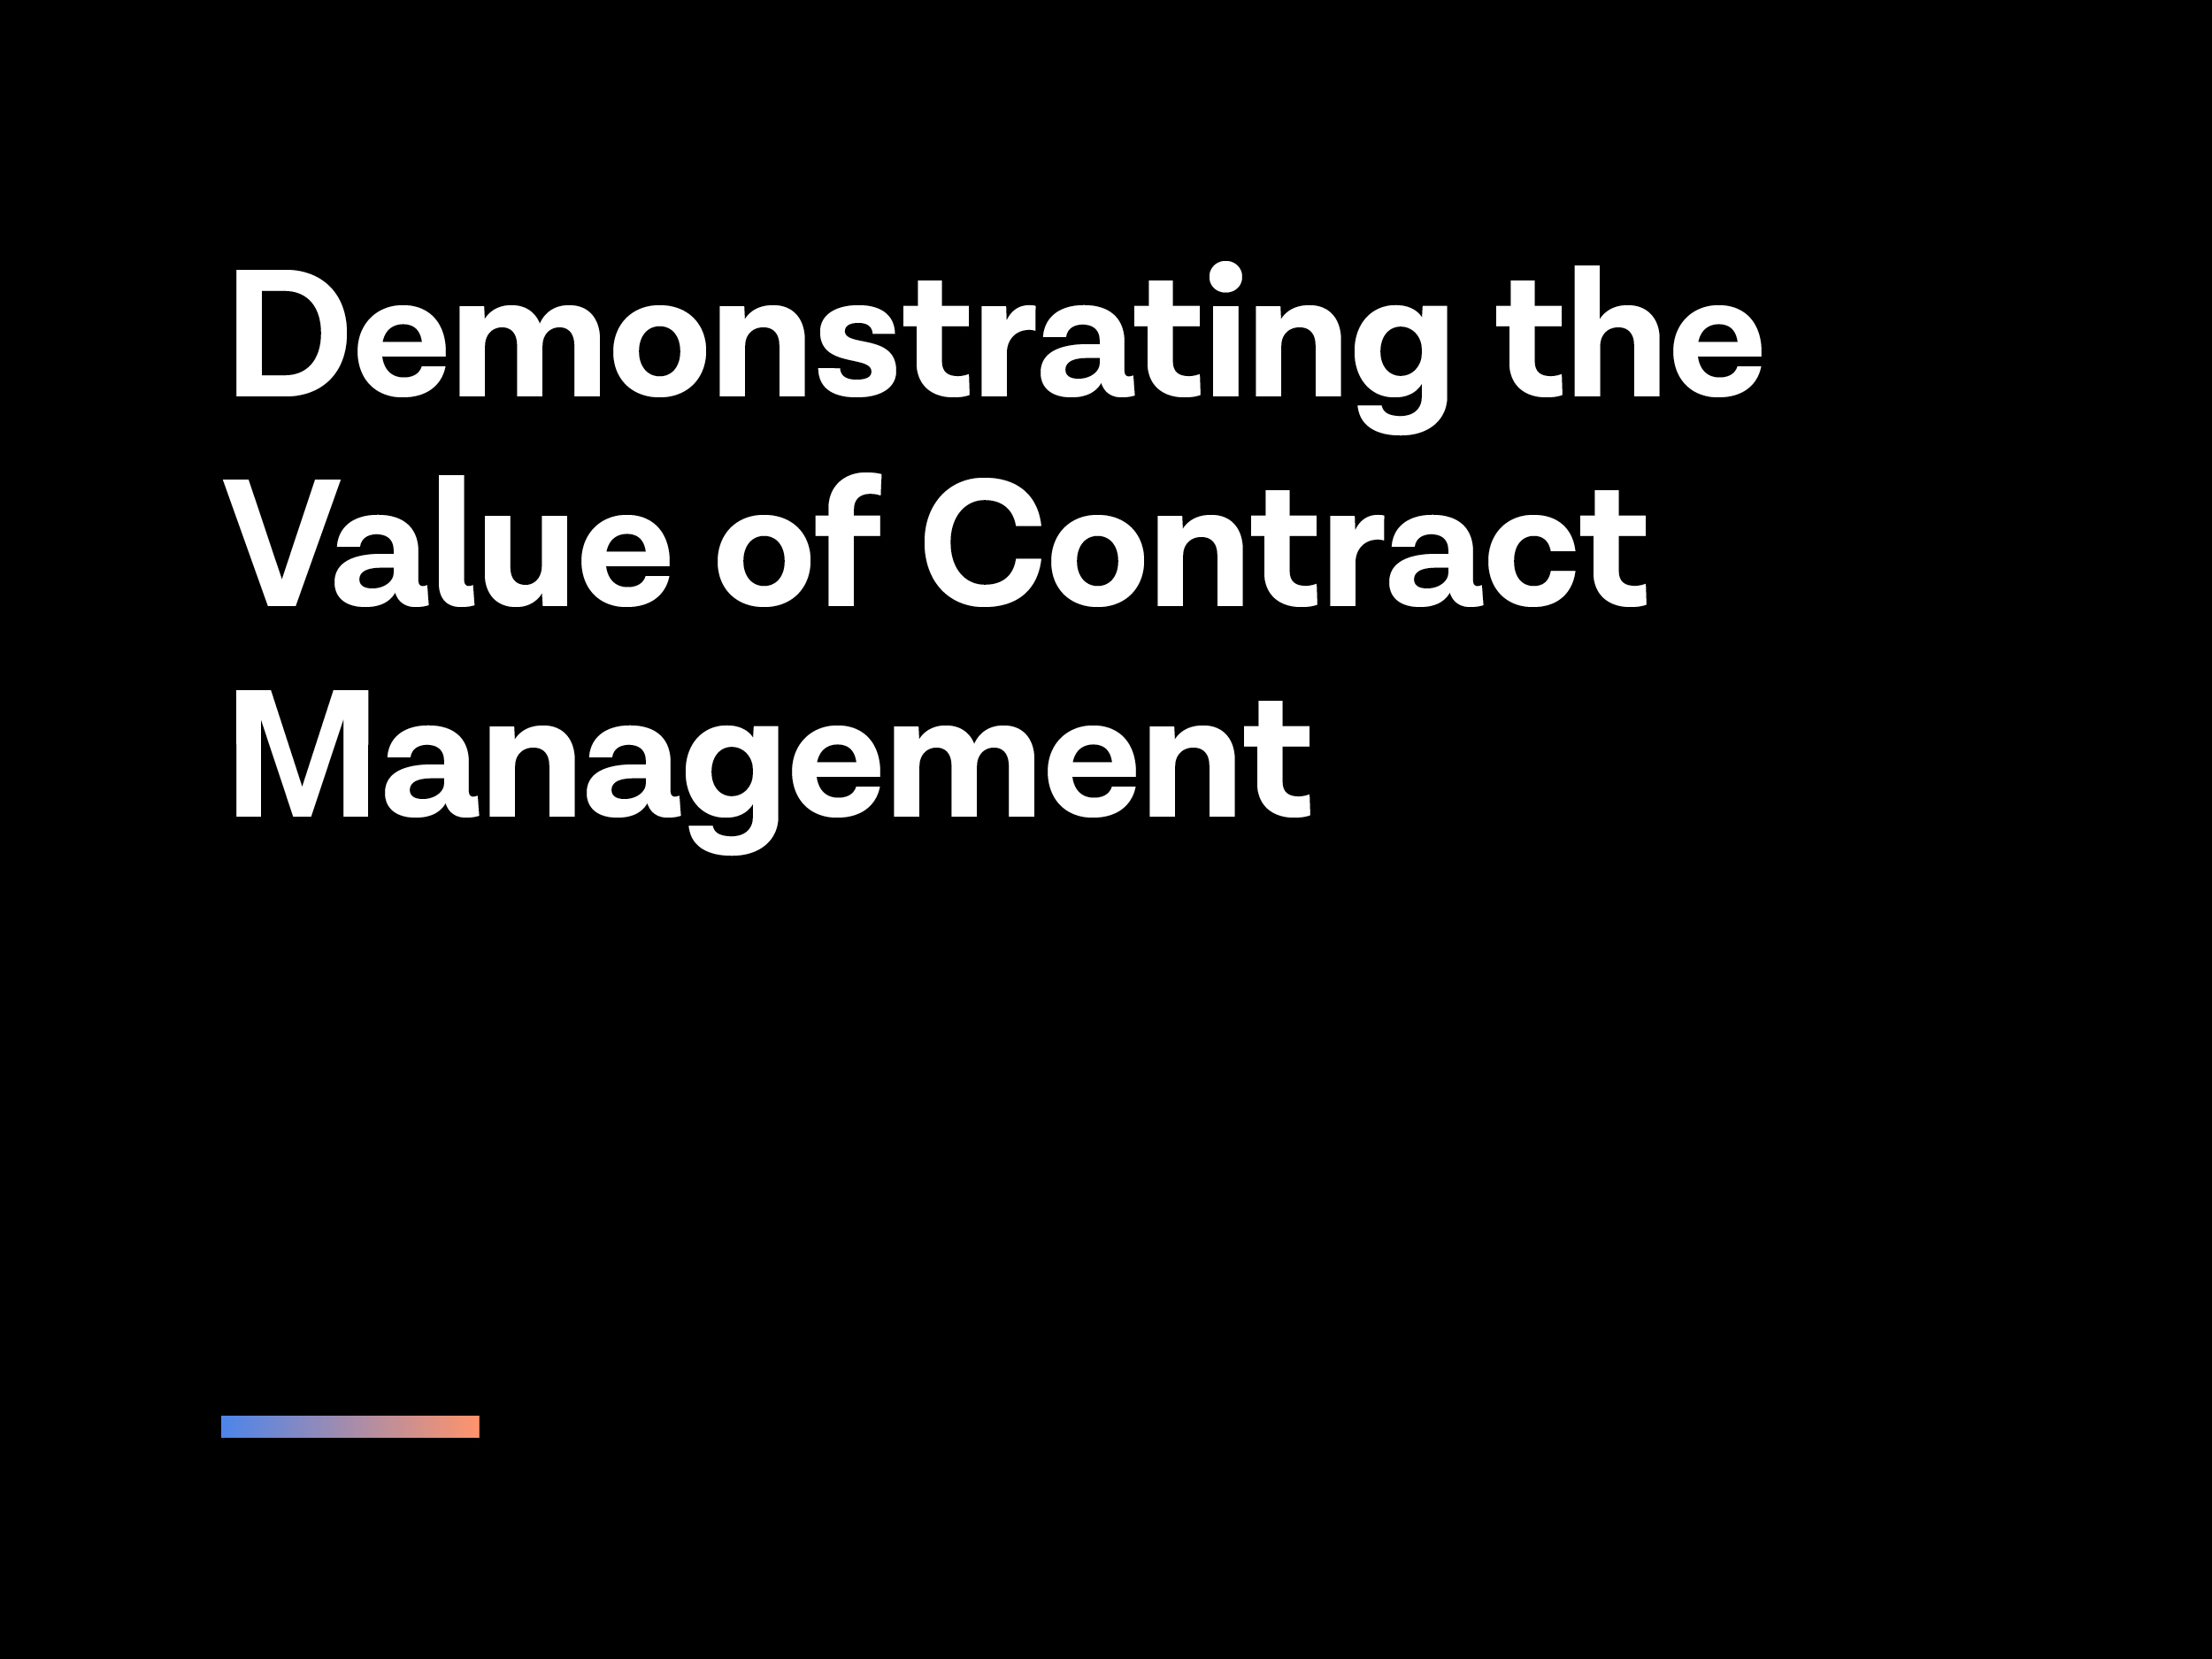 C365-ebook-Demonstrating-the-Value-of-Contract-Management